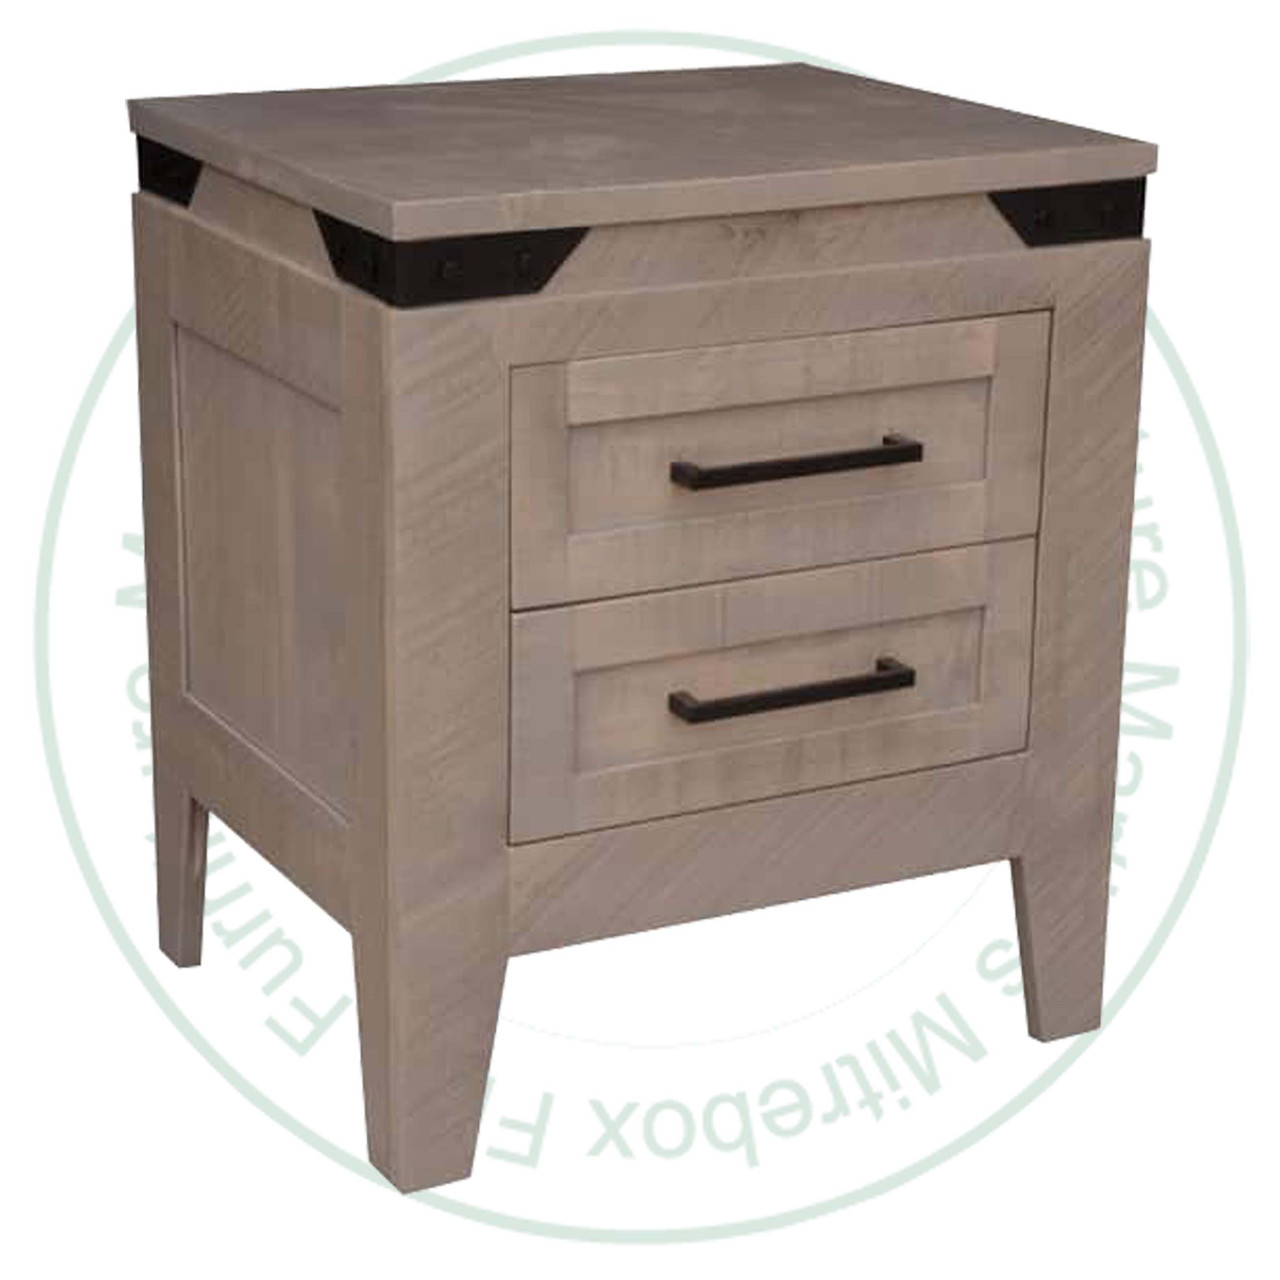 Maple Kenora Nightstand 19''D x 24''W x 26''H With 2 Drawers